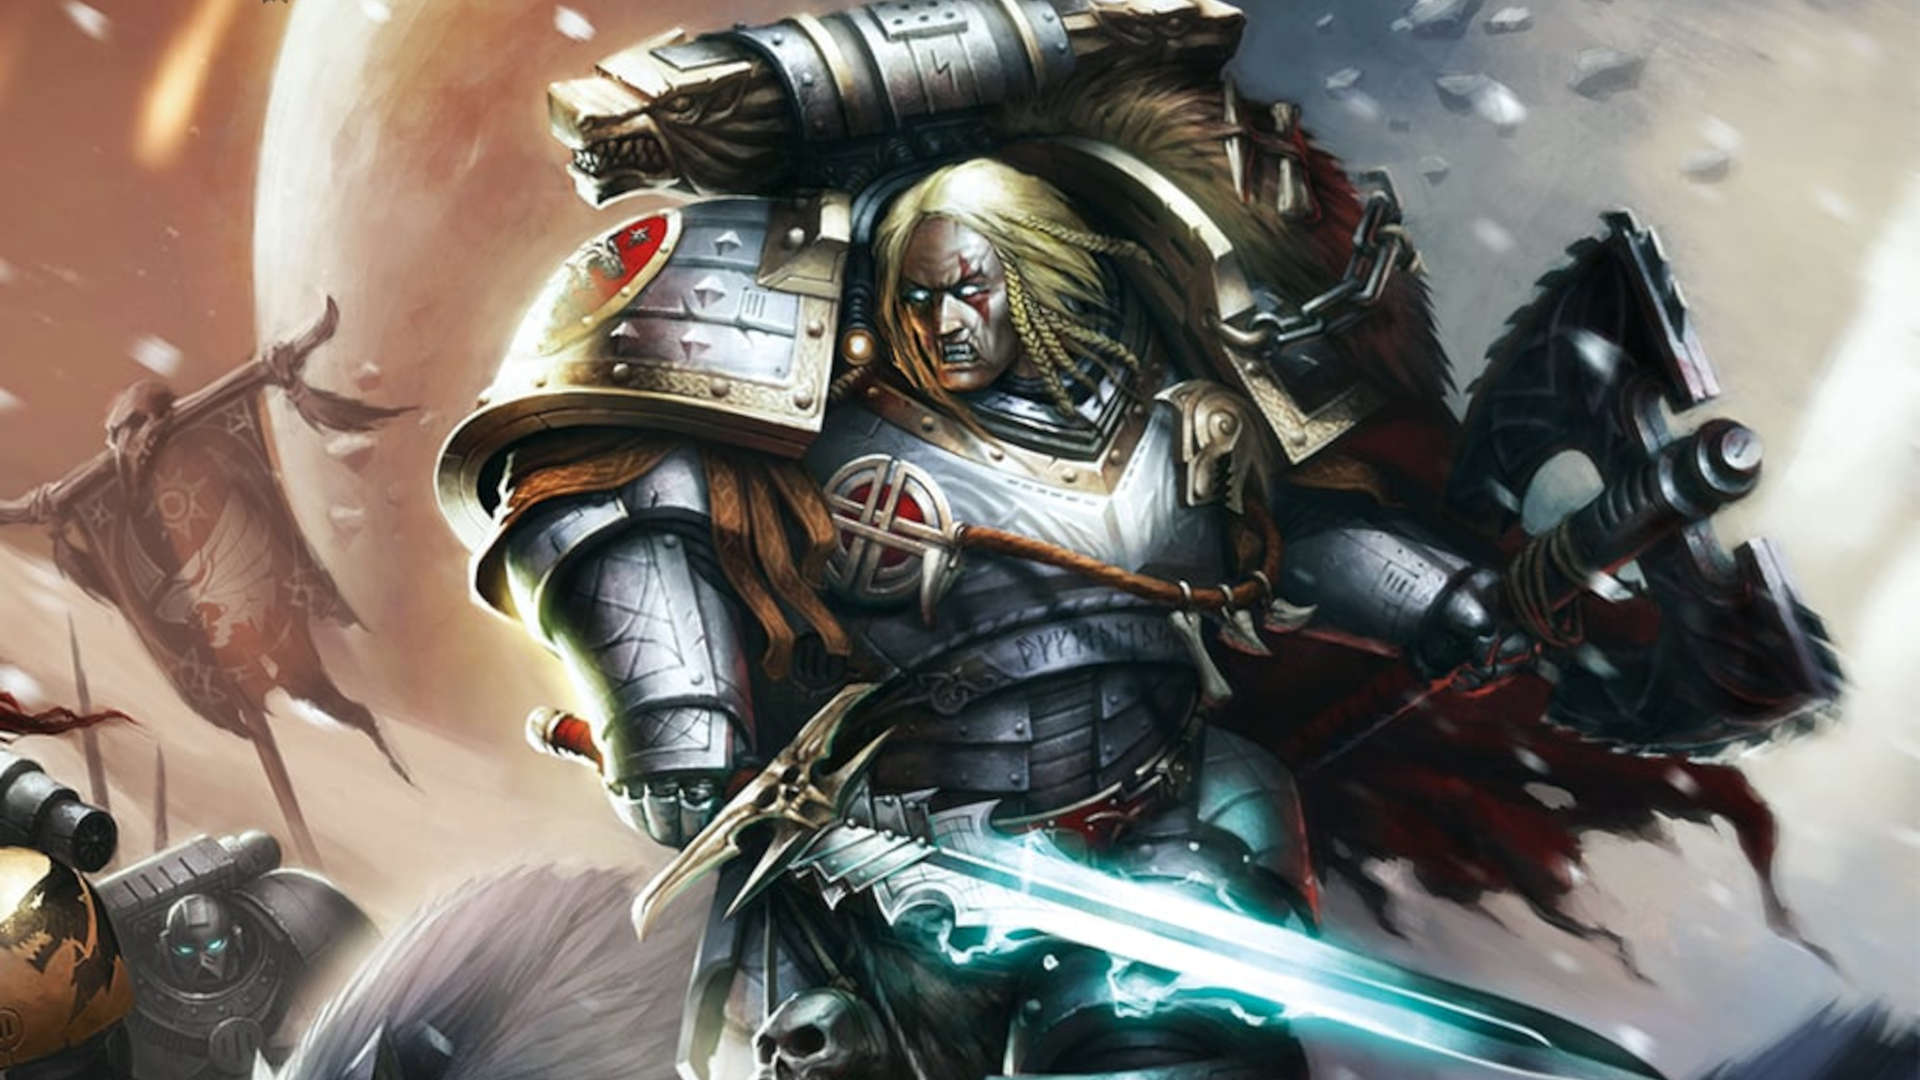 Warhammer 40k Space Wolves Primarch Leman Russ - illustration by Games Workshop of a huge, glowering warrior with wild blonde hair, clad in layered grey power armour, wielding a crackling sword